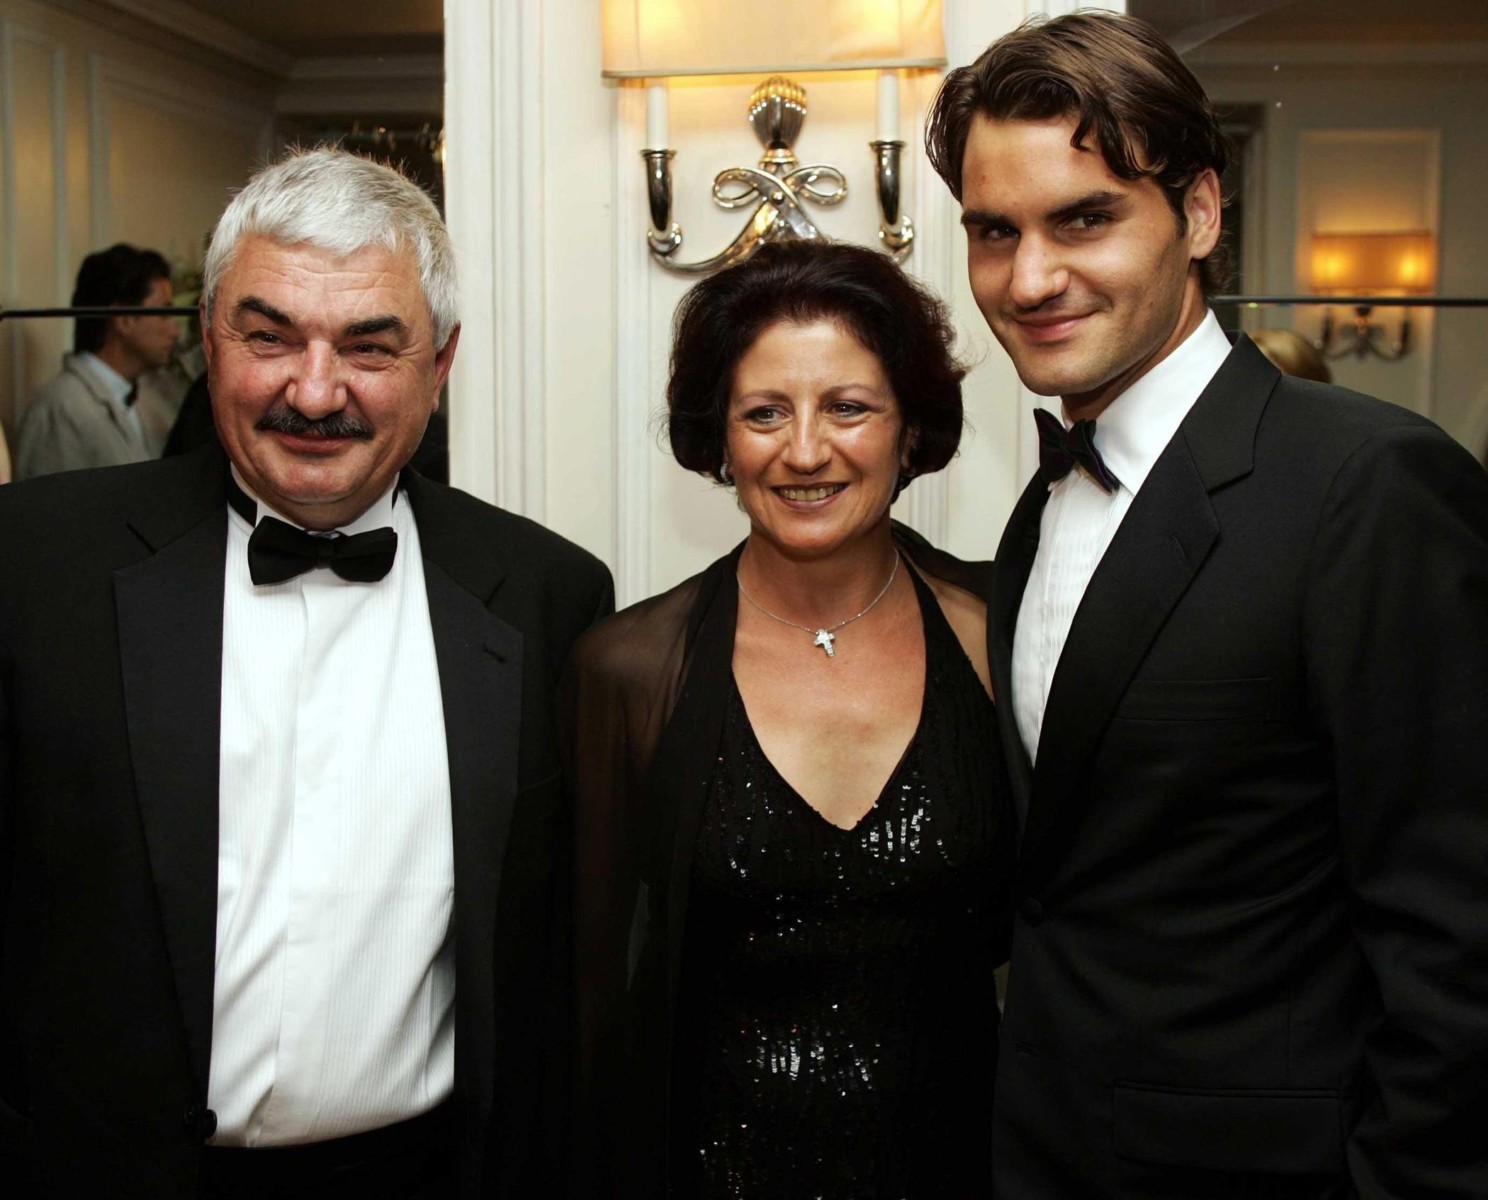 Federer moved his parents Robert and Lynette into one of the apartments of the pad